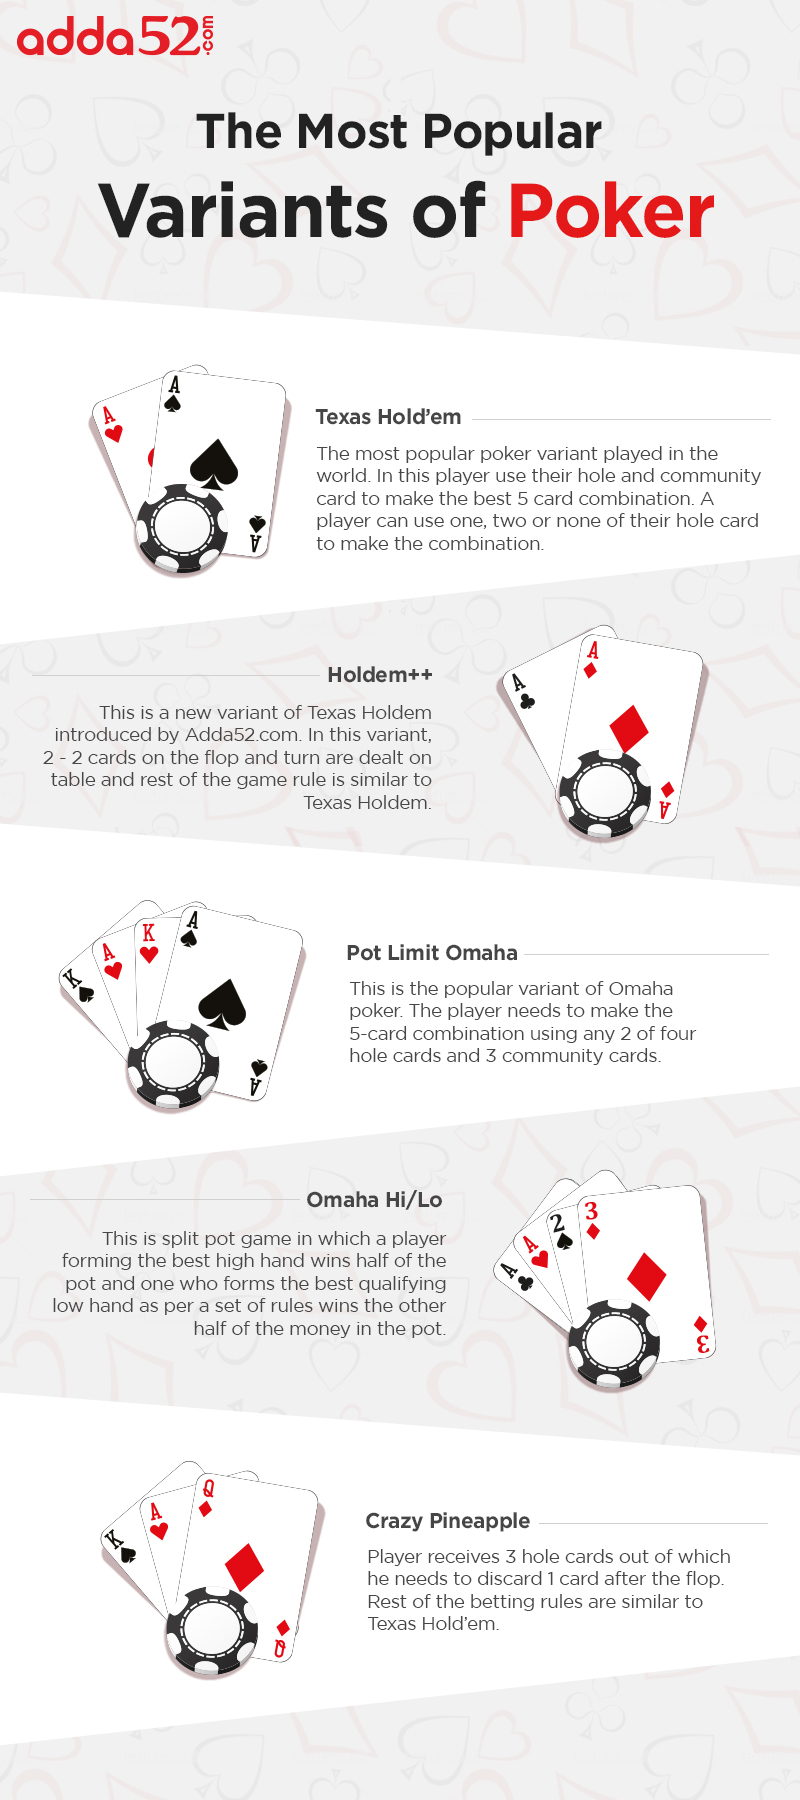 The most popular variants of Poker